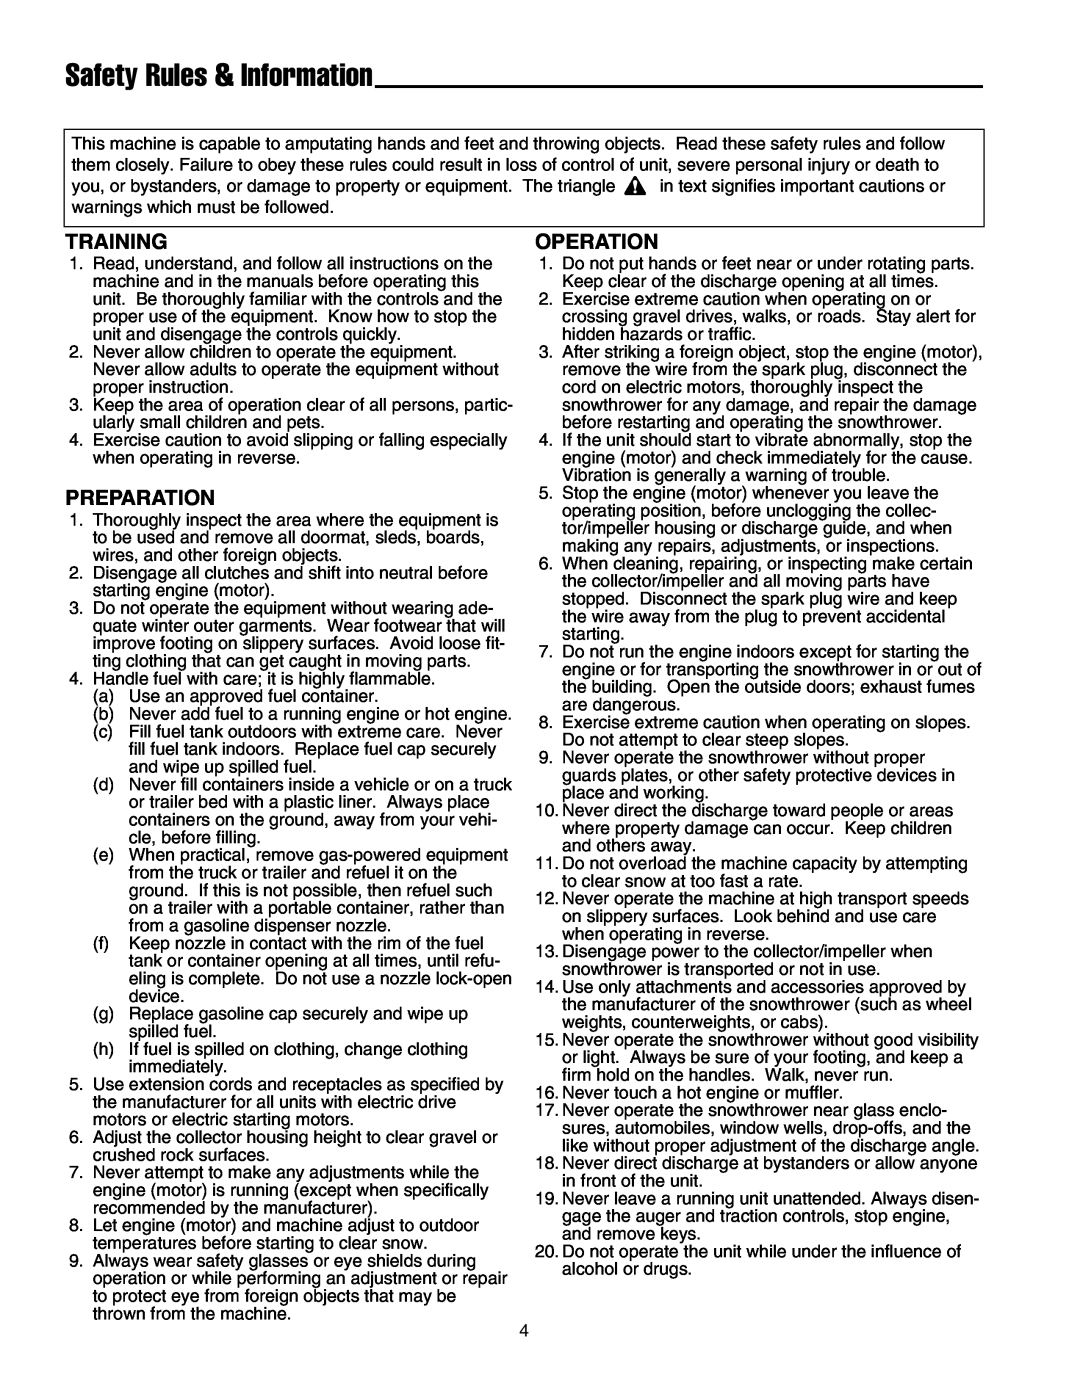 Simplicity 522E, 1695514, 1695468 instruction sheet Safety Rules & Information, Training, Preparation, Operation 